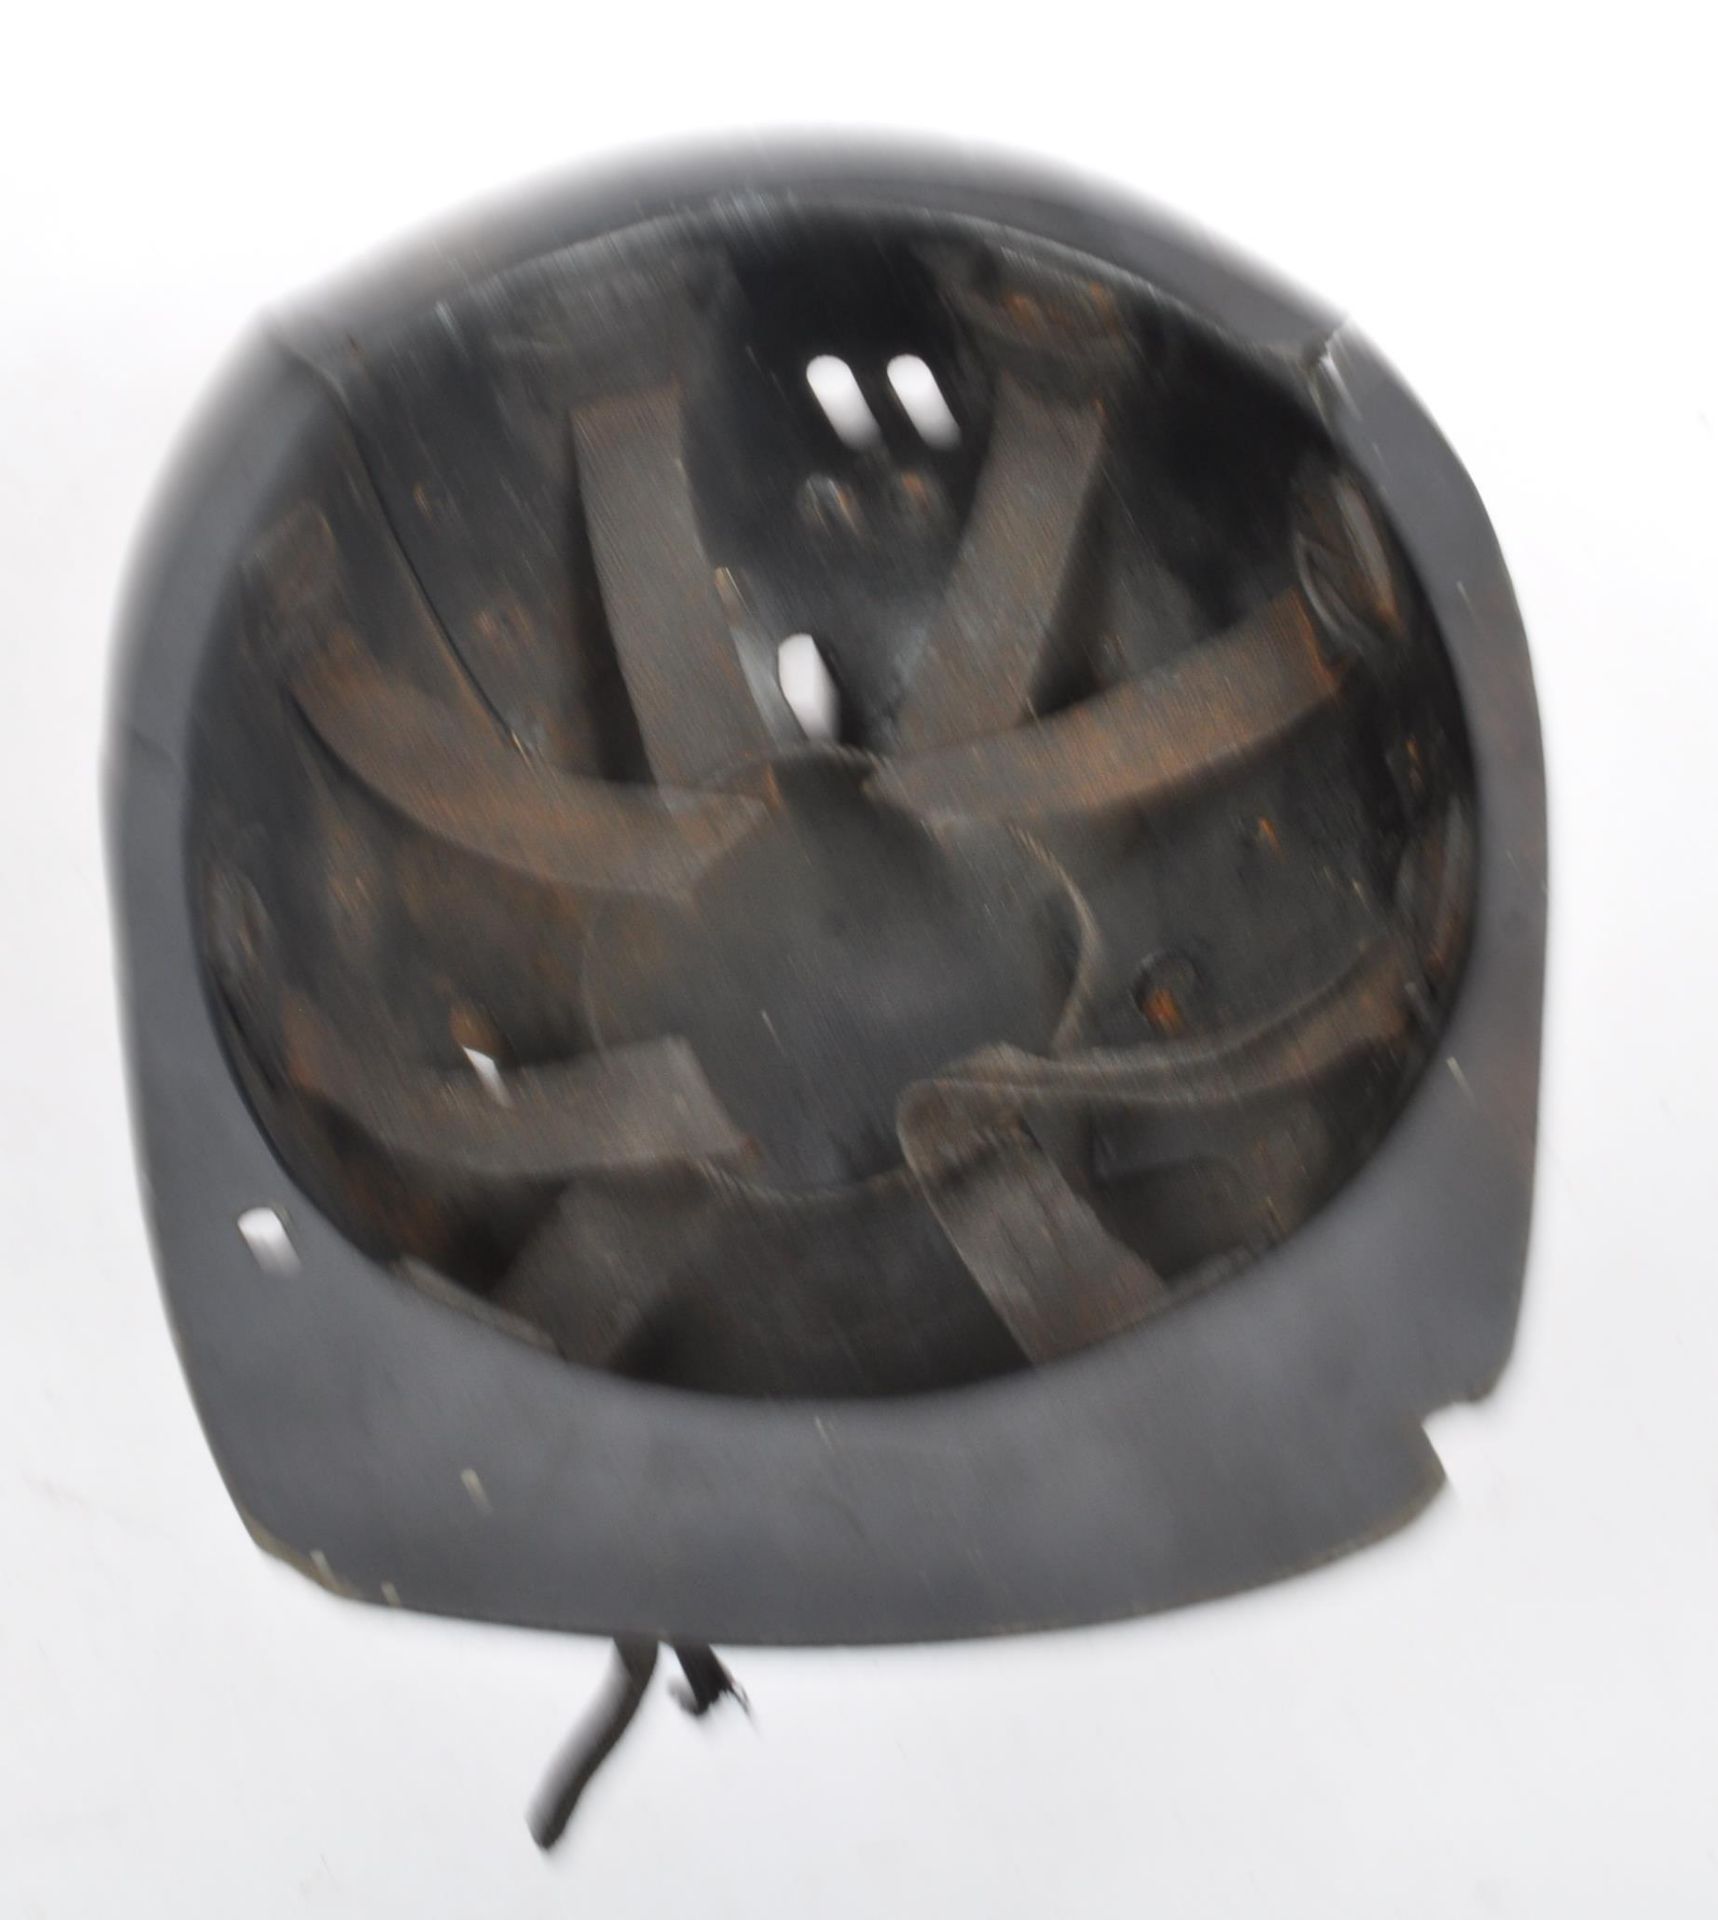 MID CENTURY LEATHER COAL MINERS SAFETY HELMET - Image 6 of 7